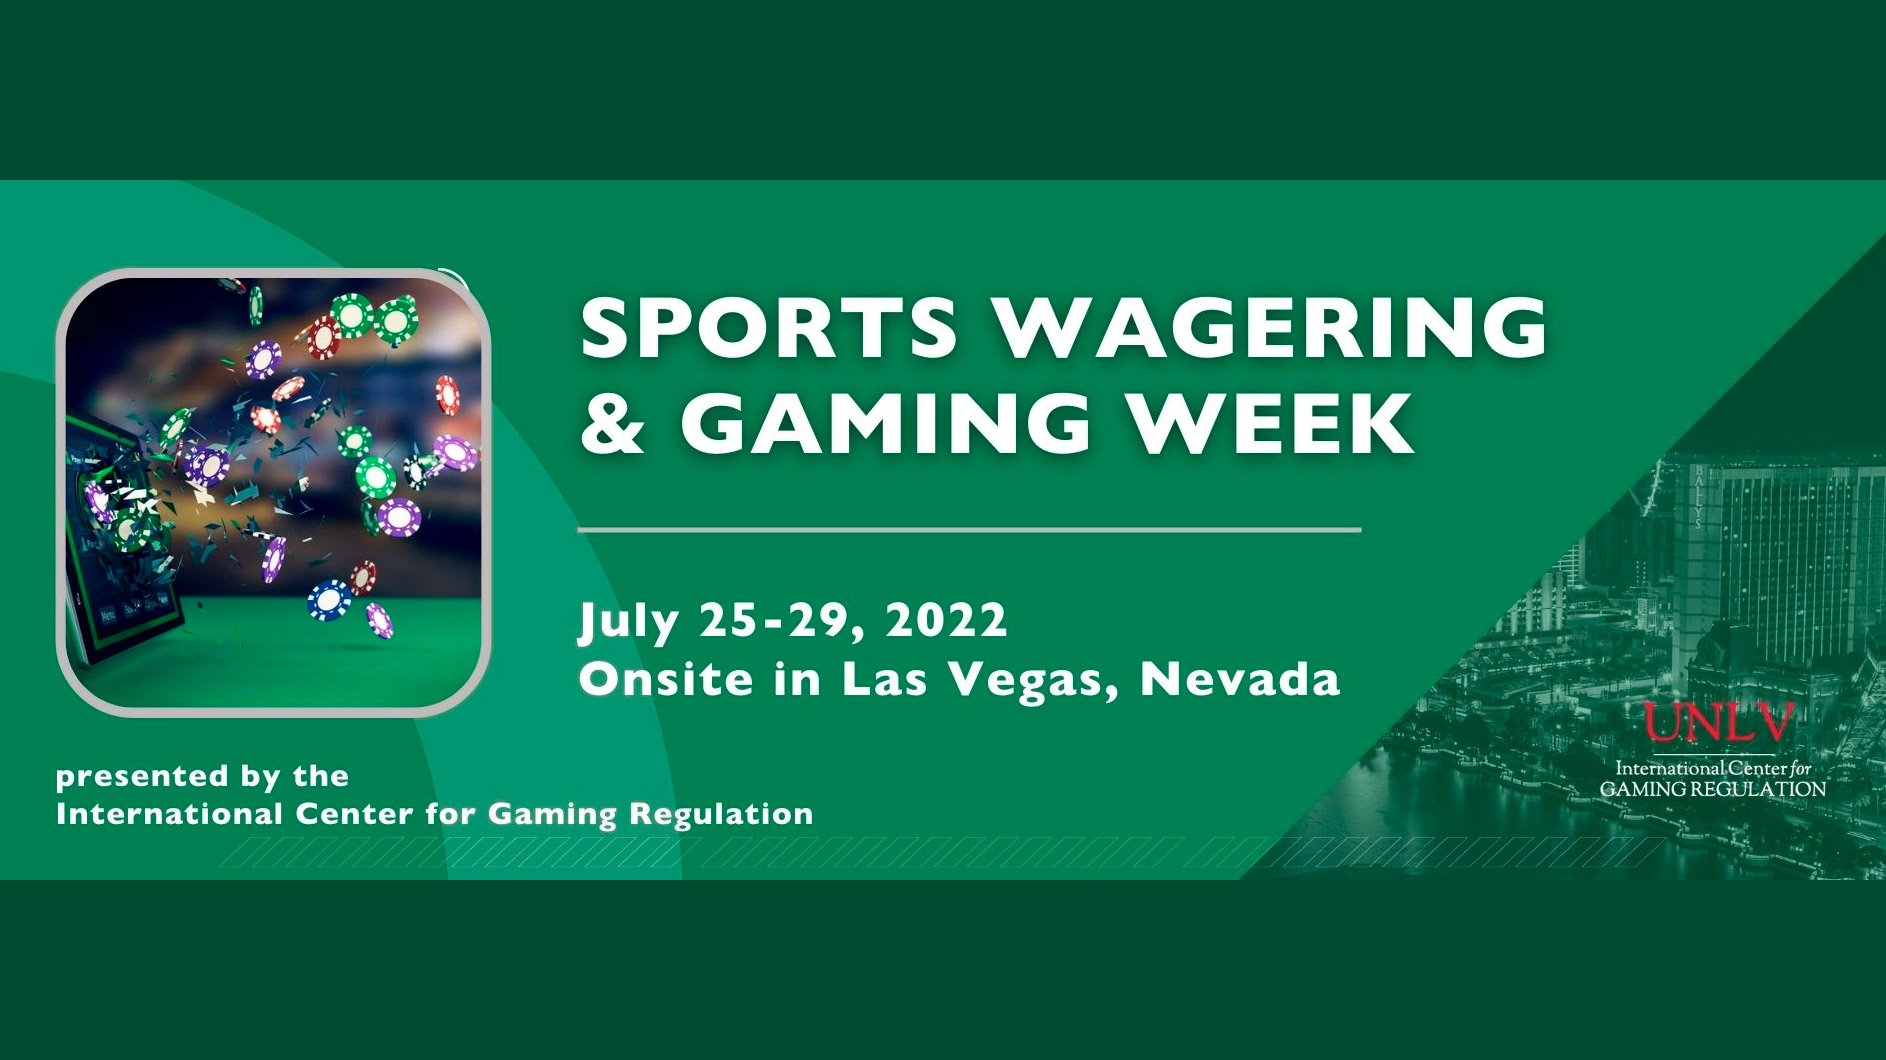 UNLV's ICGR launches first-ever Sports Wagering & Gaming Week with two in-person events in Las Vegas